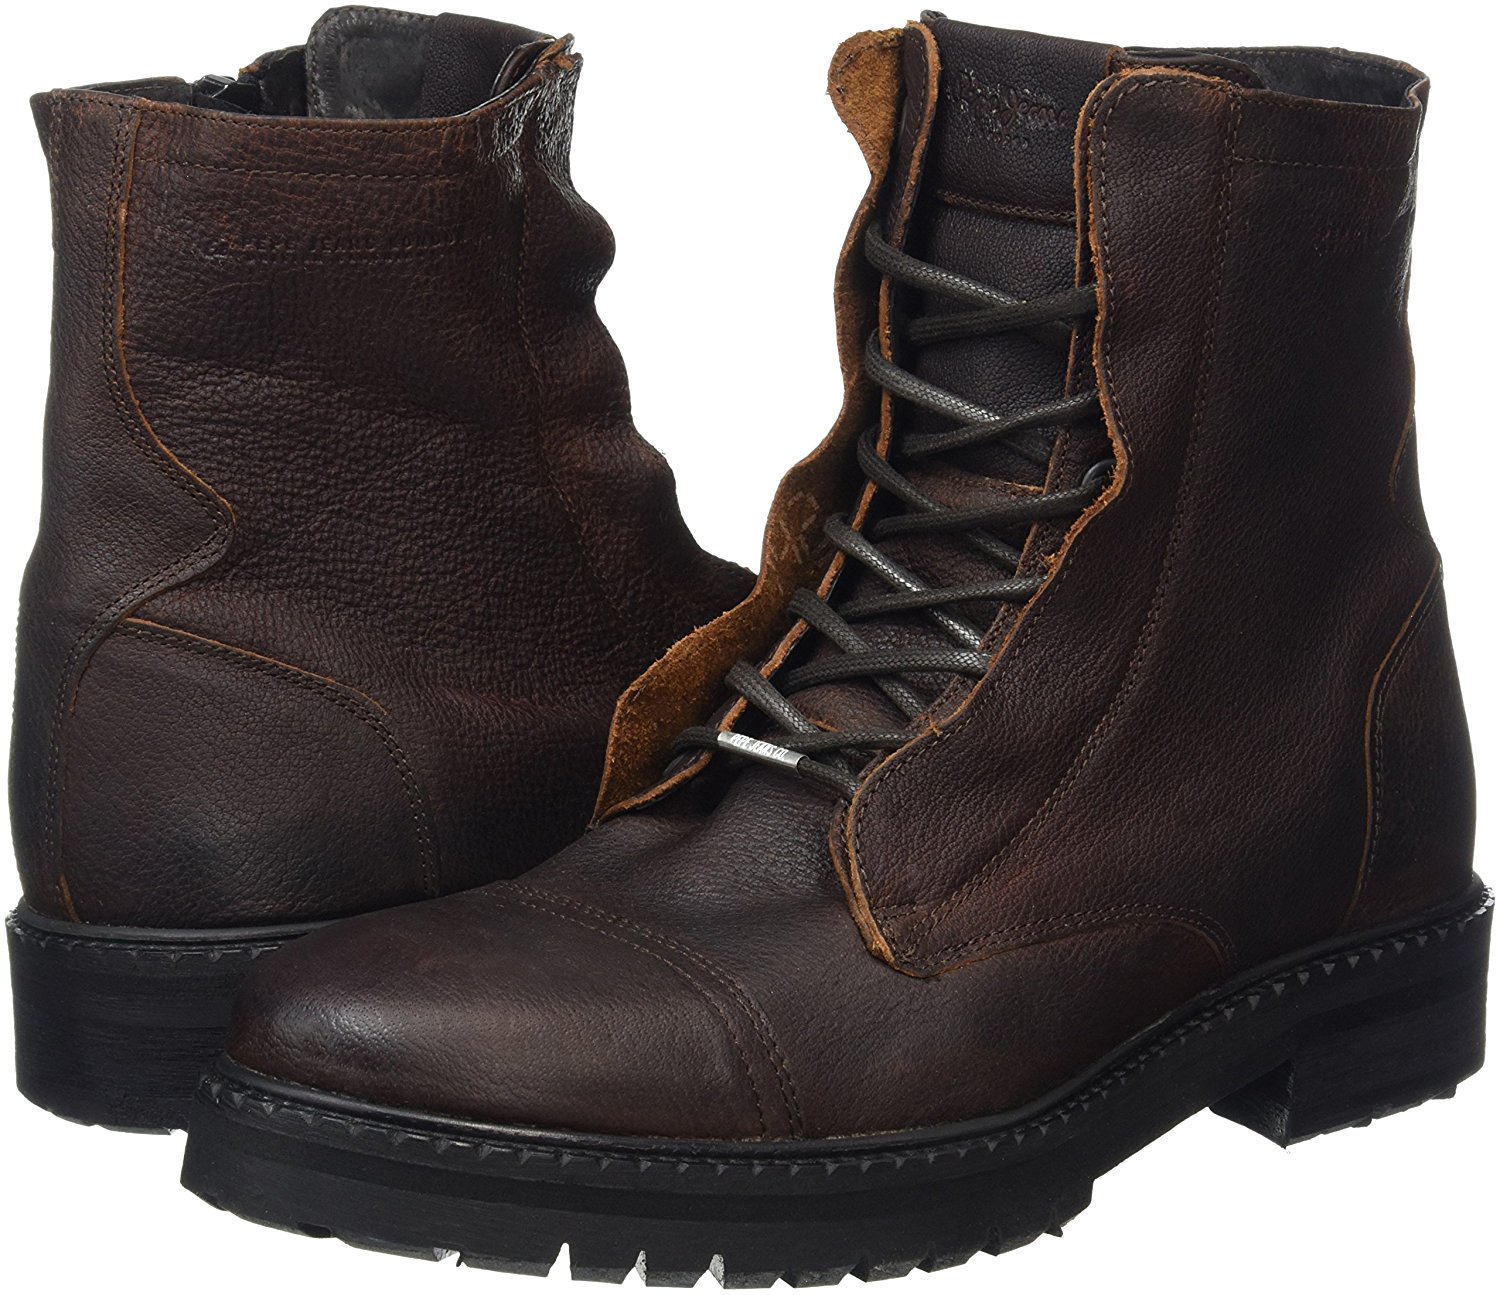 Pepe Jeans Men's Iron Ankle Boots Brown Leather